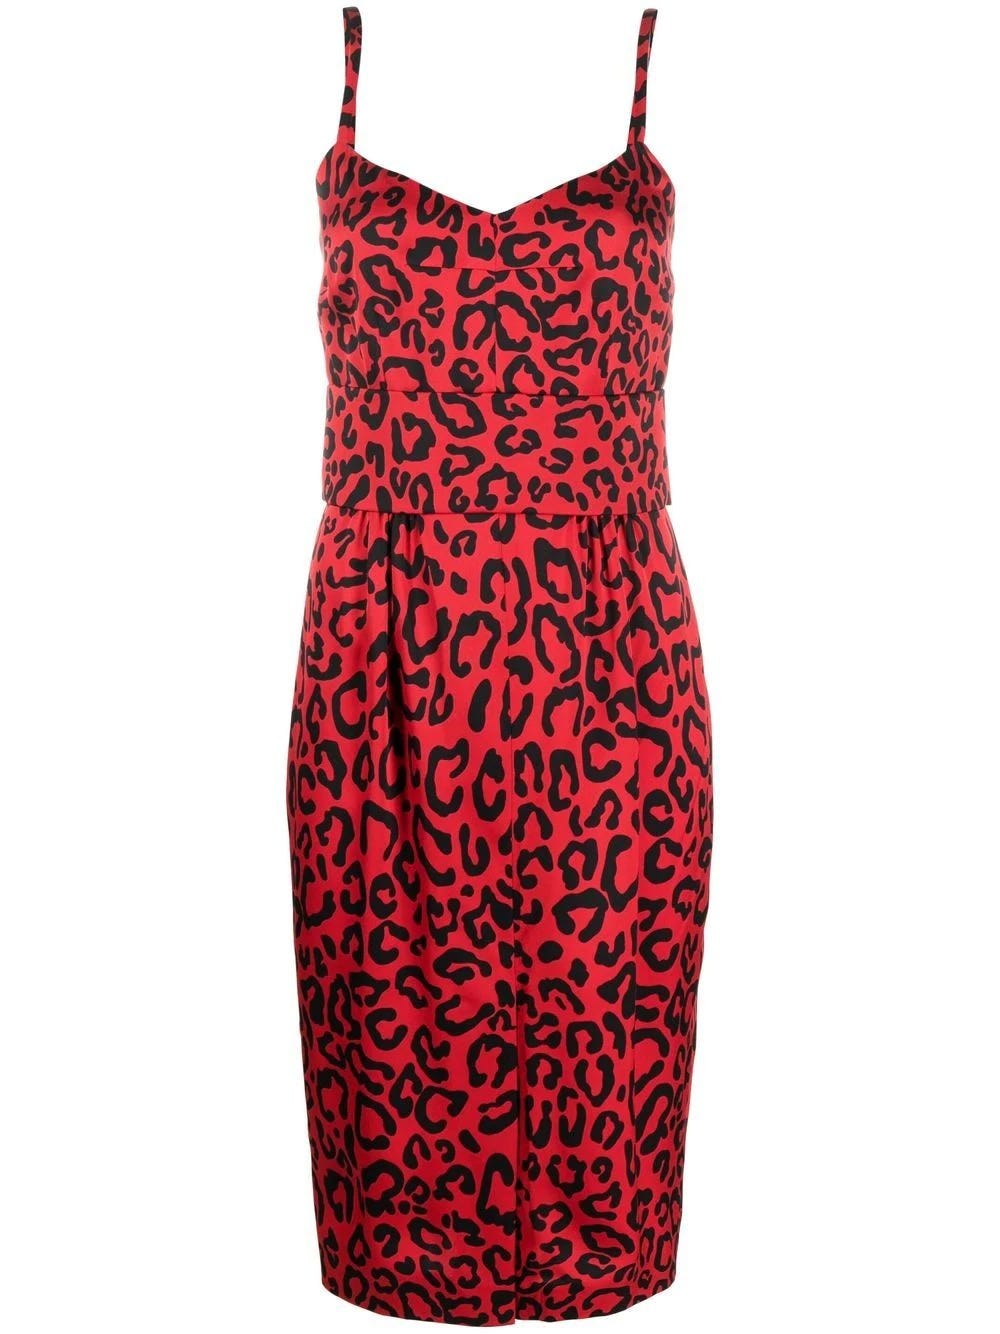 DOLCE & GABBANA RED SHORT DRESS WITH LEOPARD PRINT